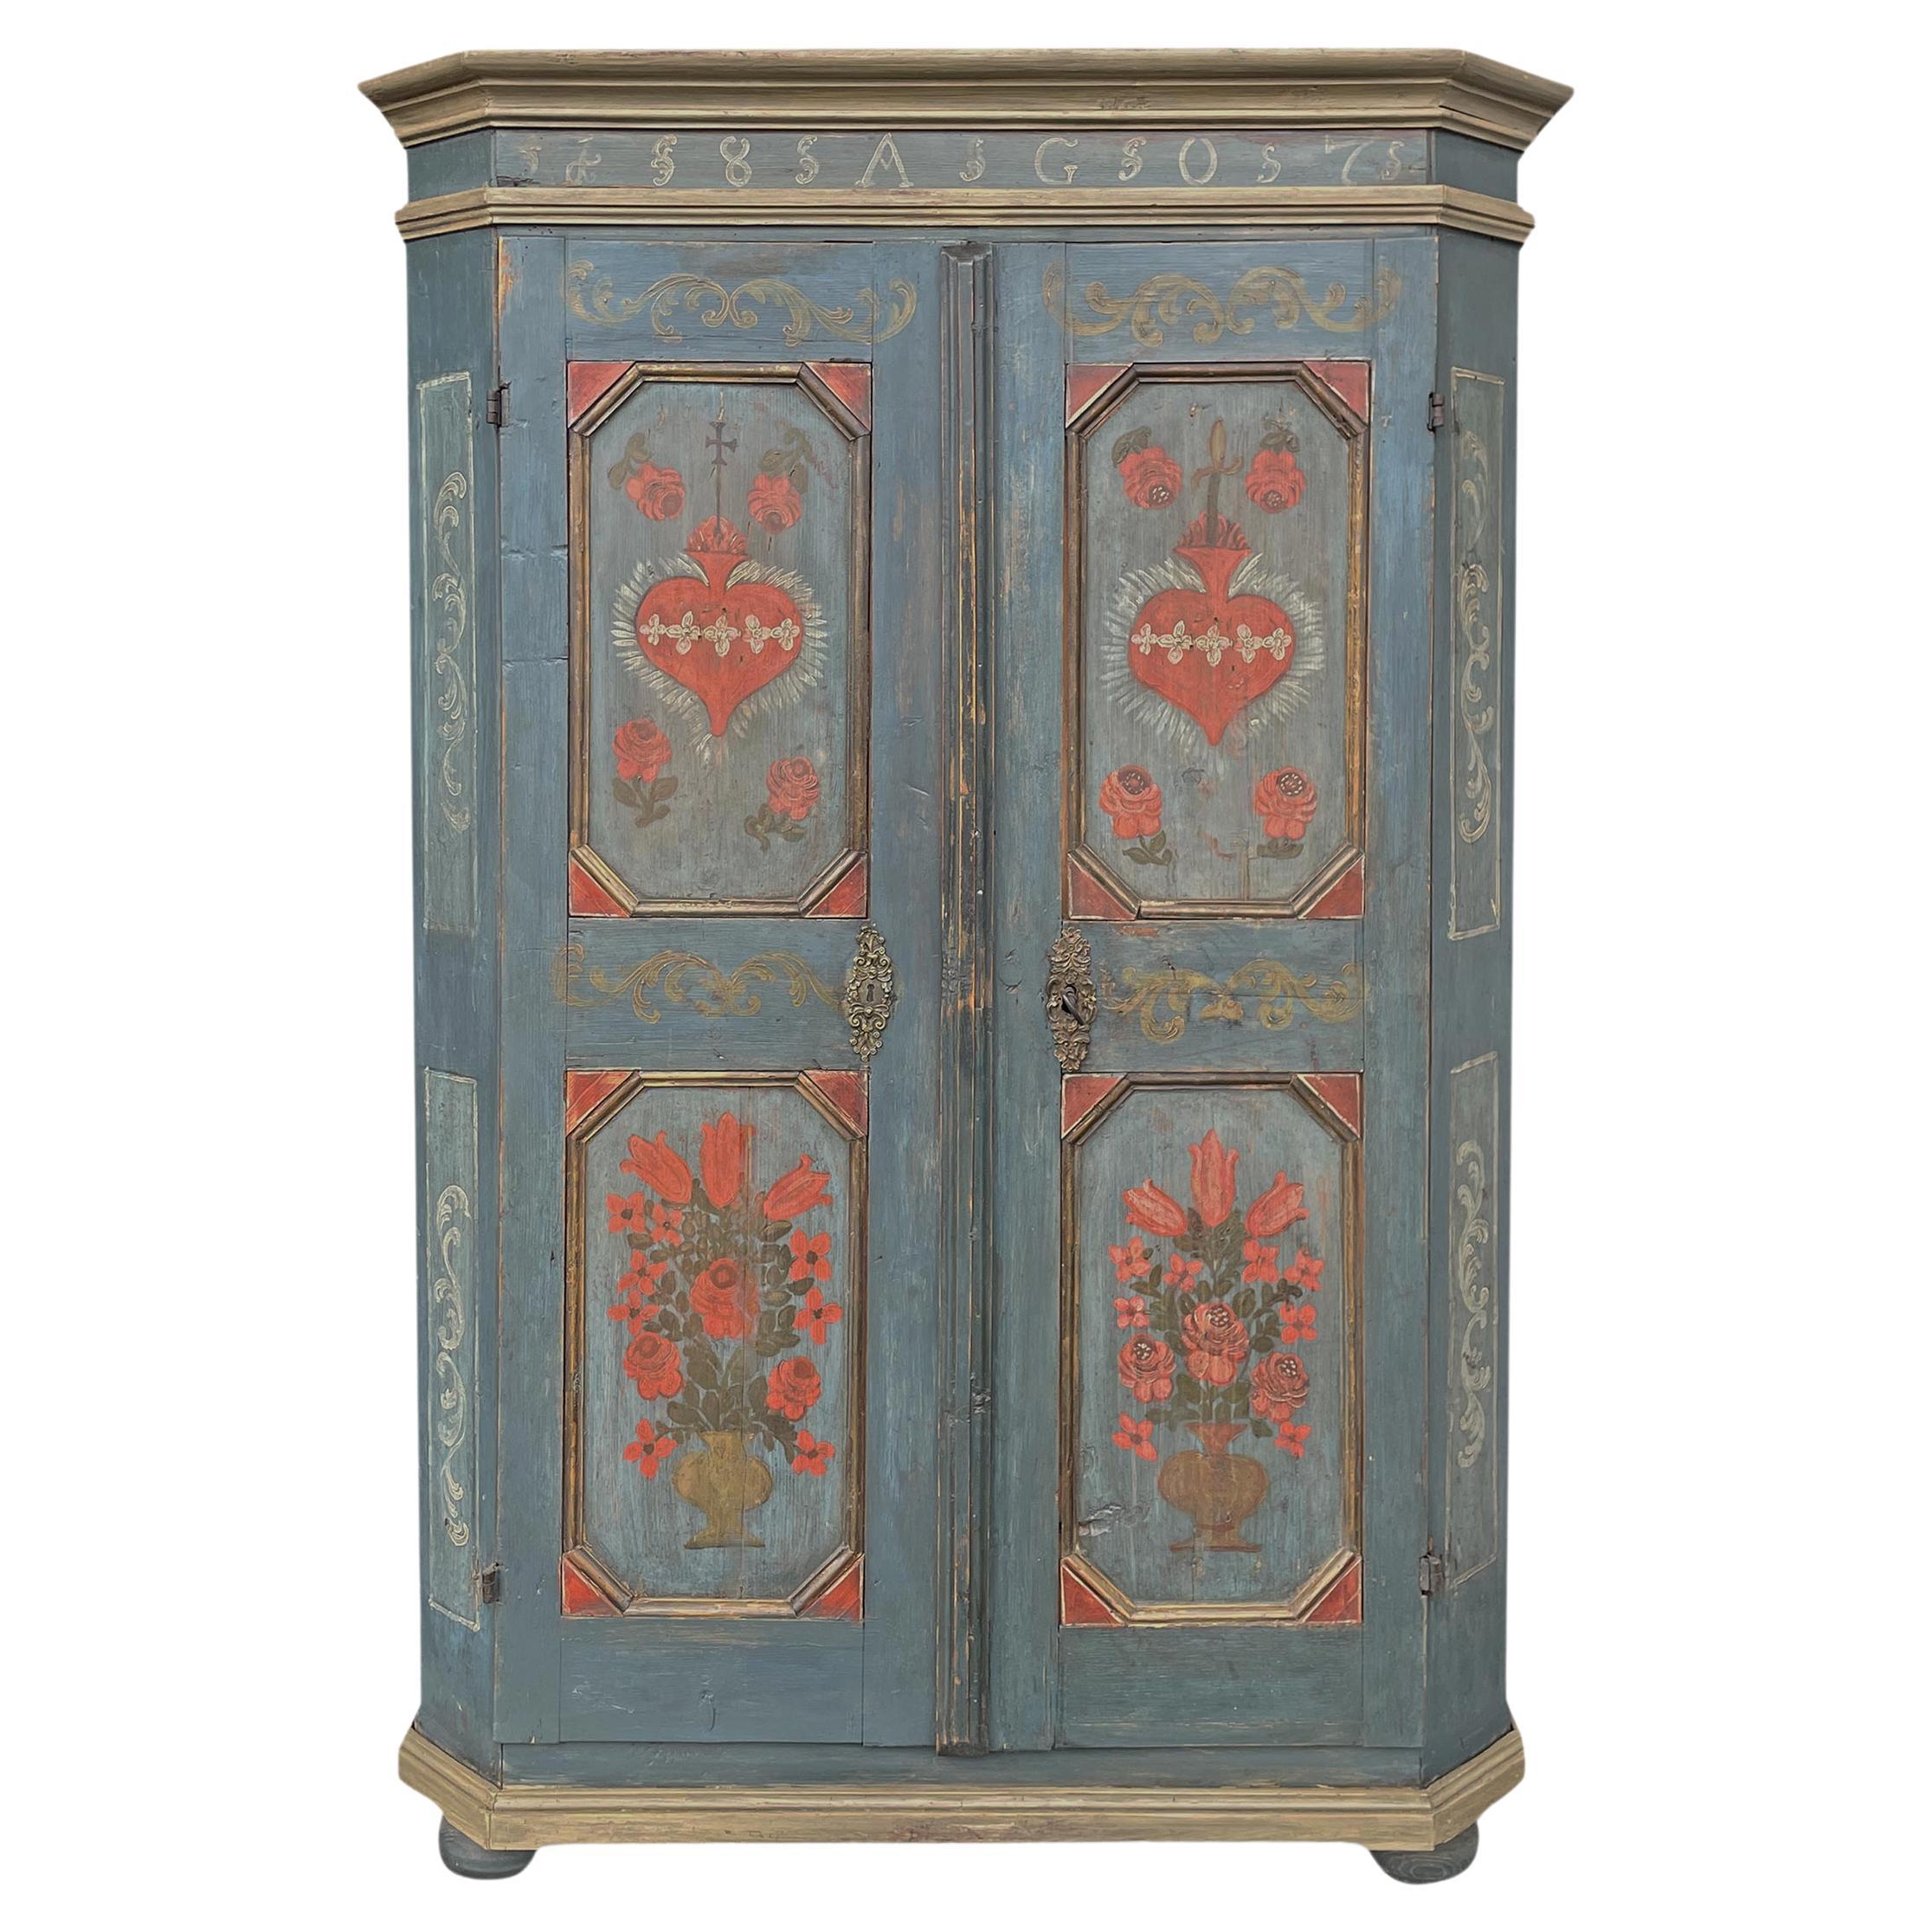 Early 1800s Painted Furniture